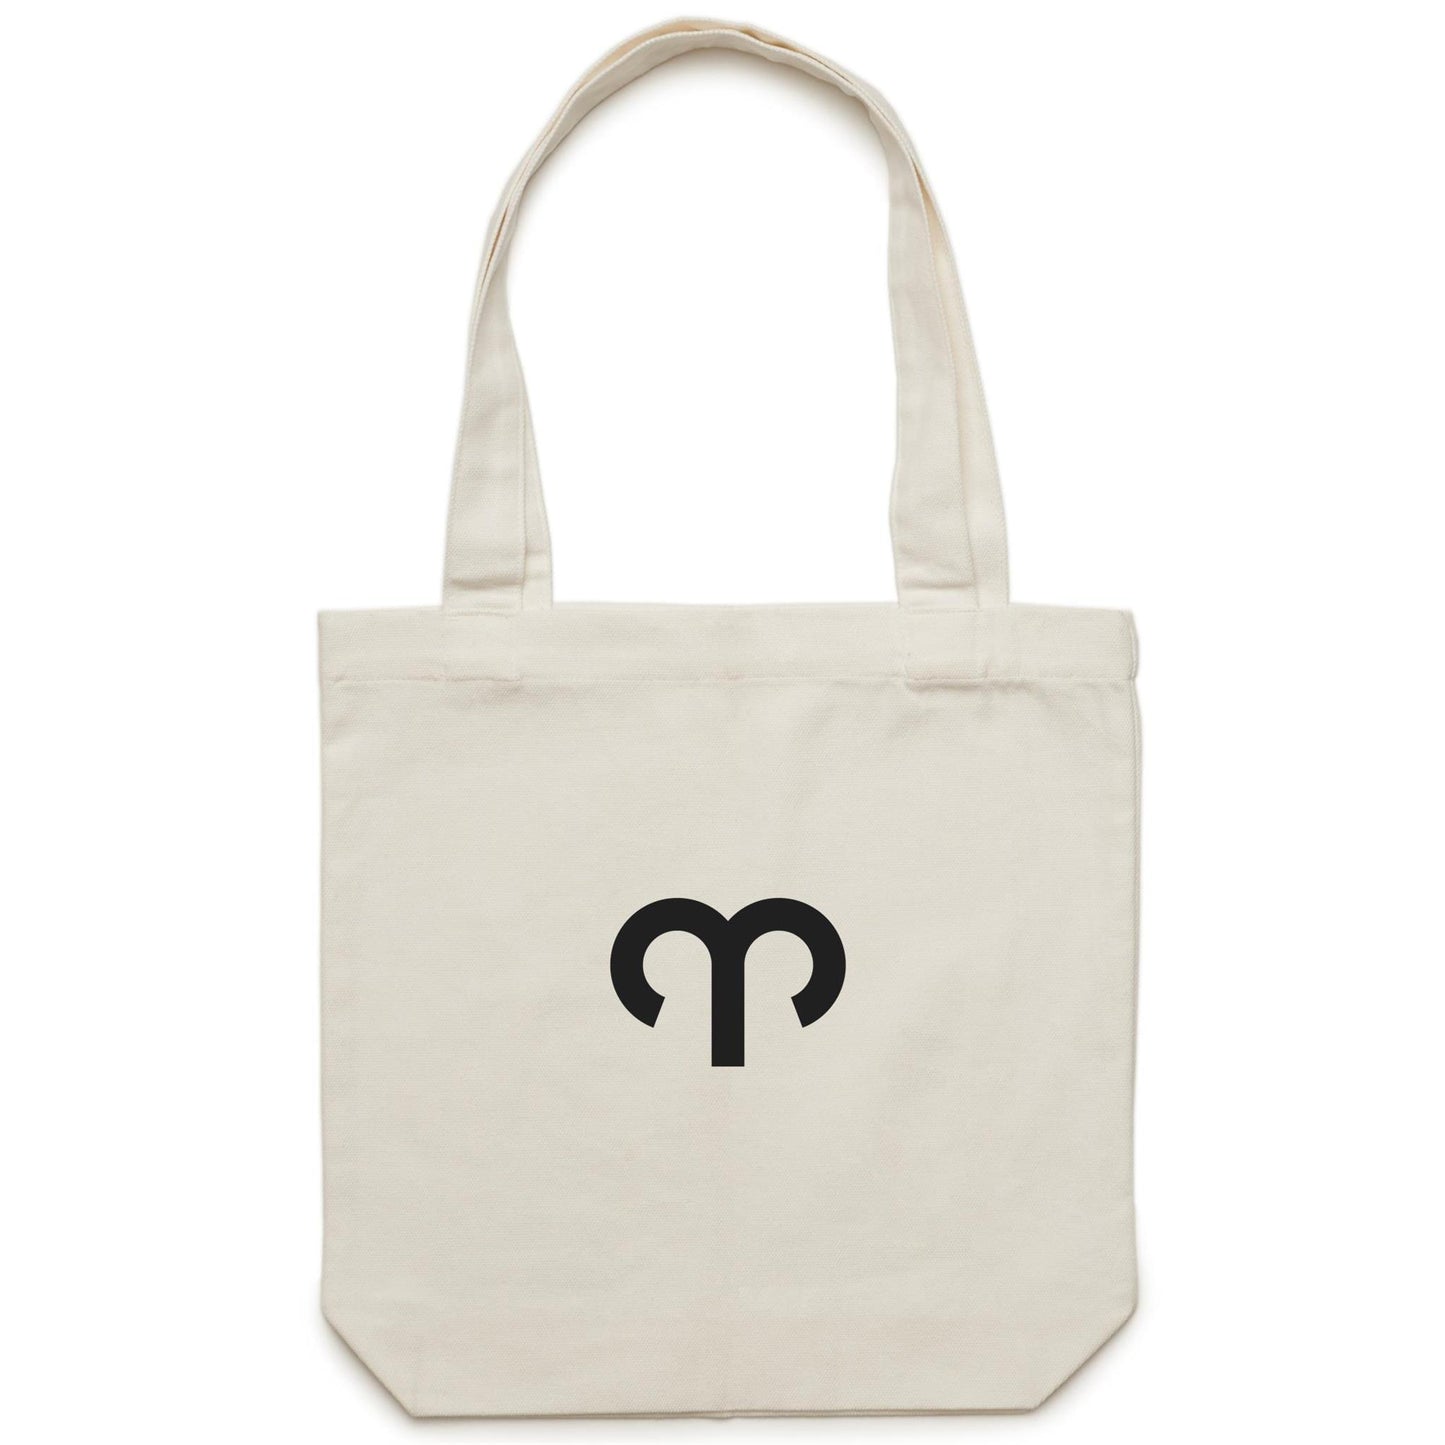 Aries Canvas Totes